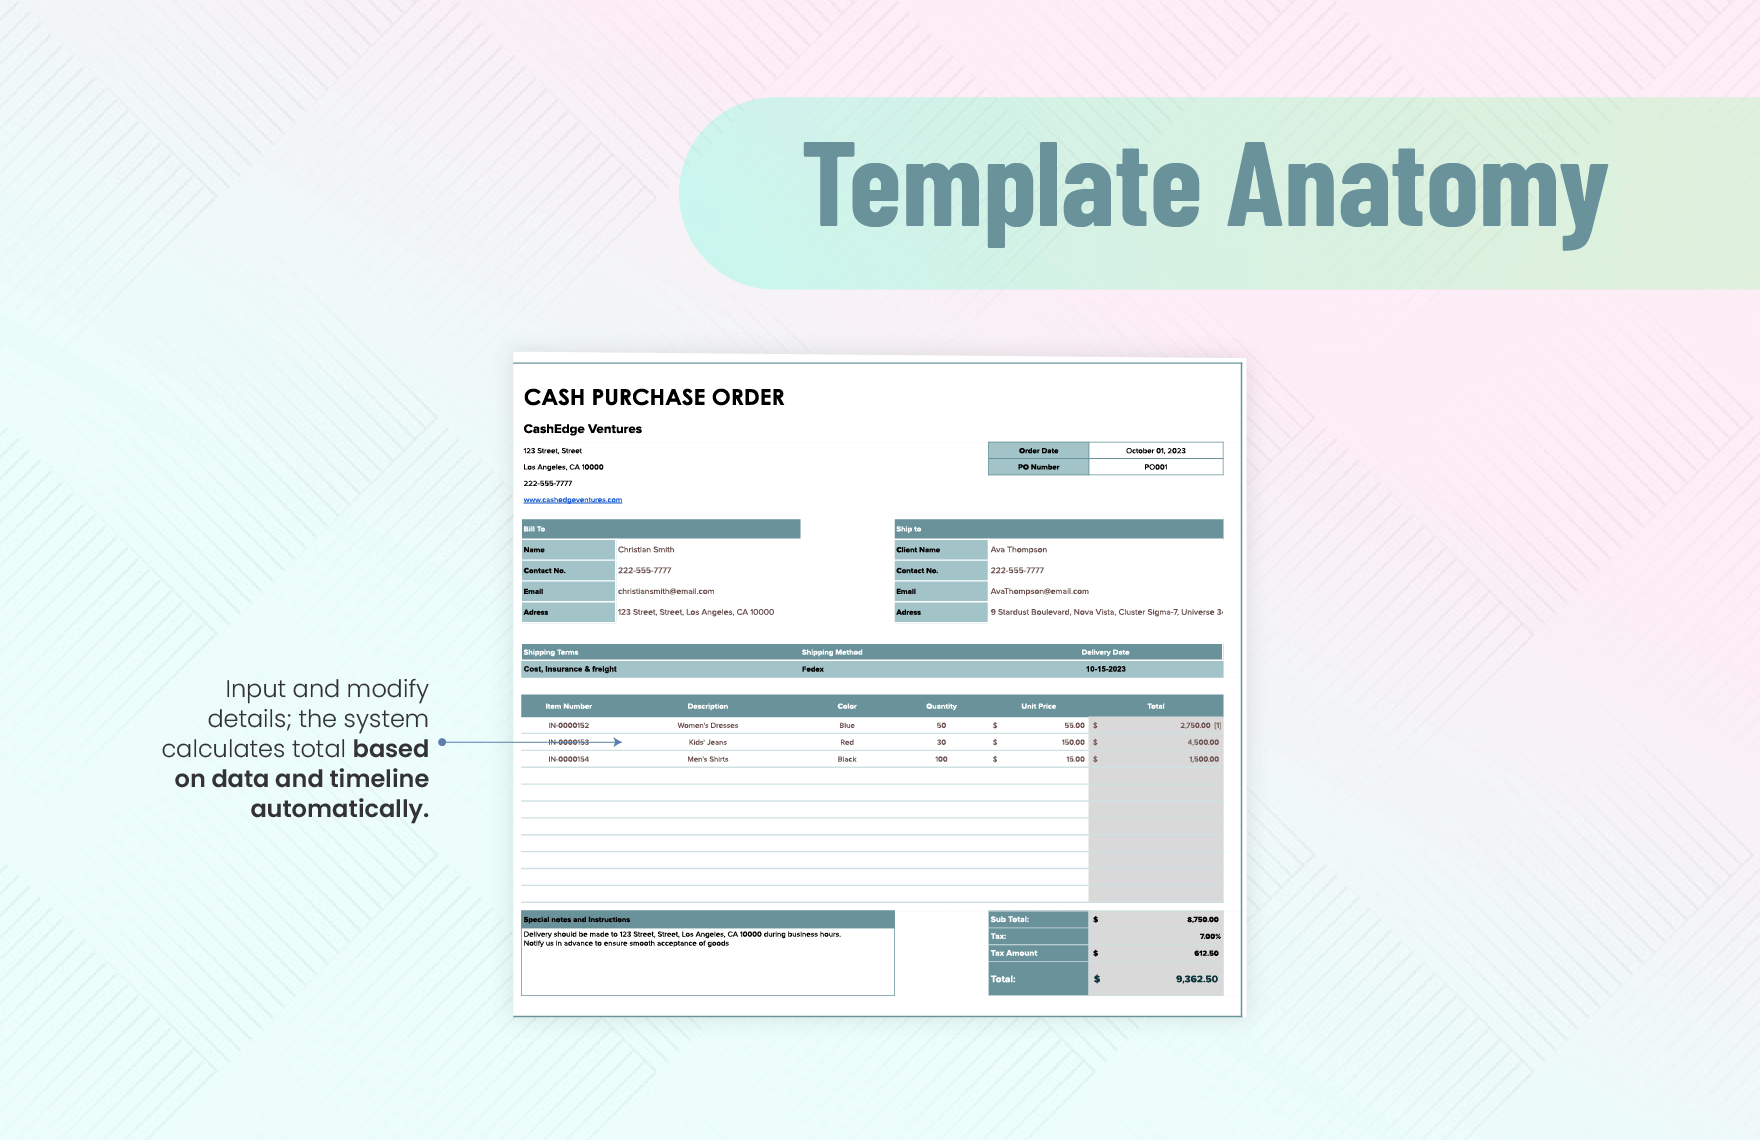 Cash Purchase Order Template